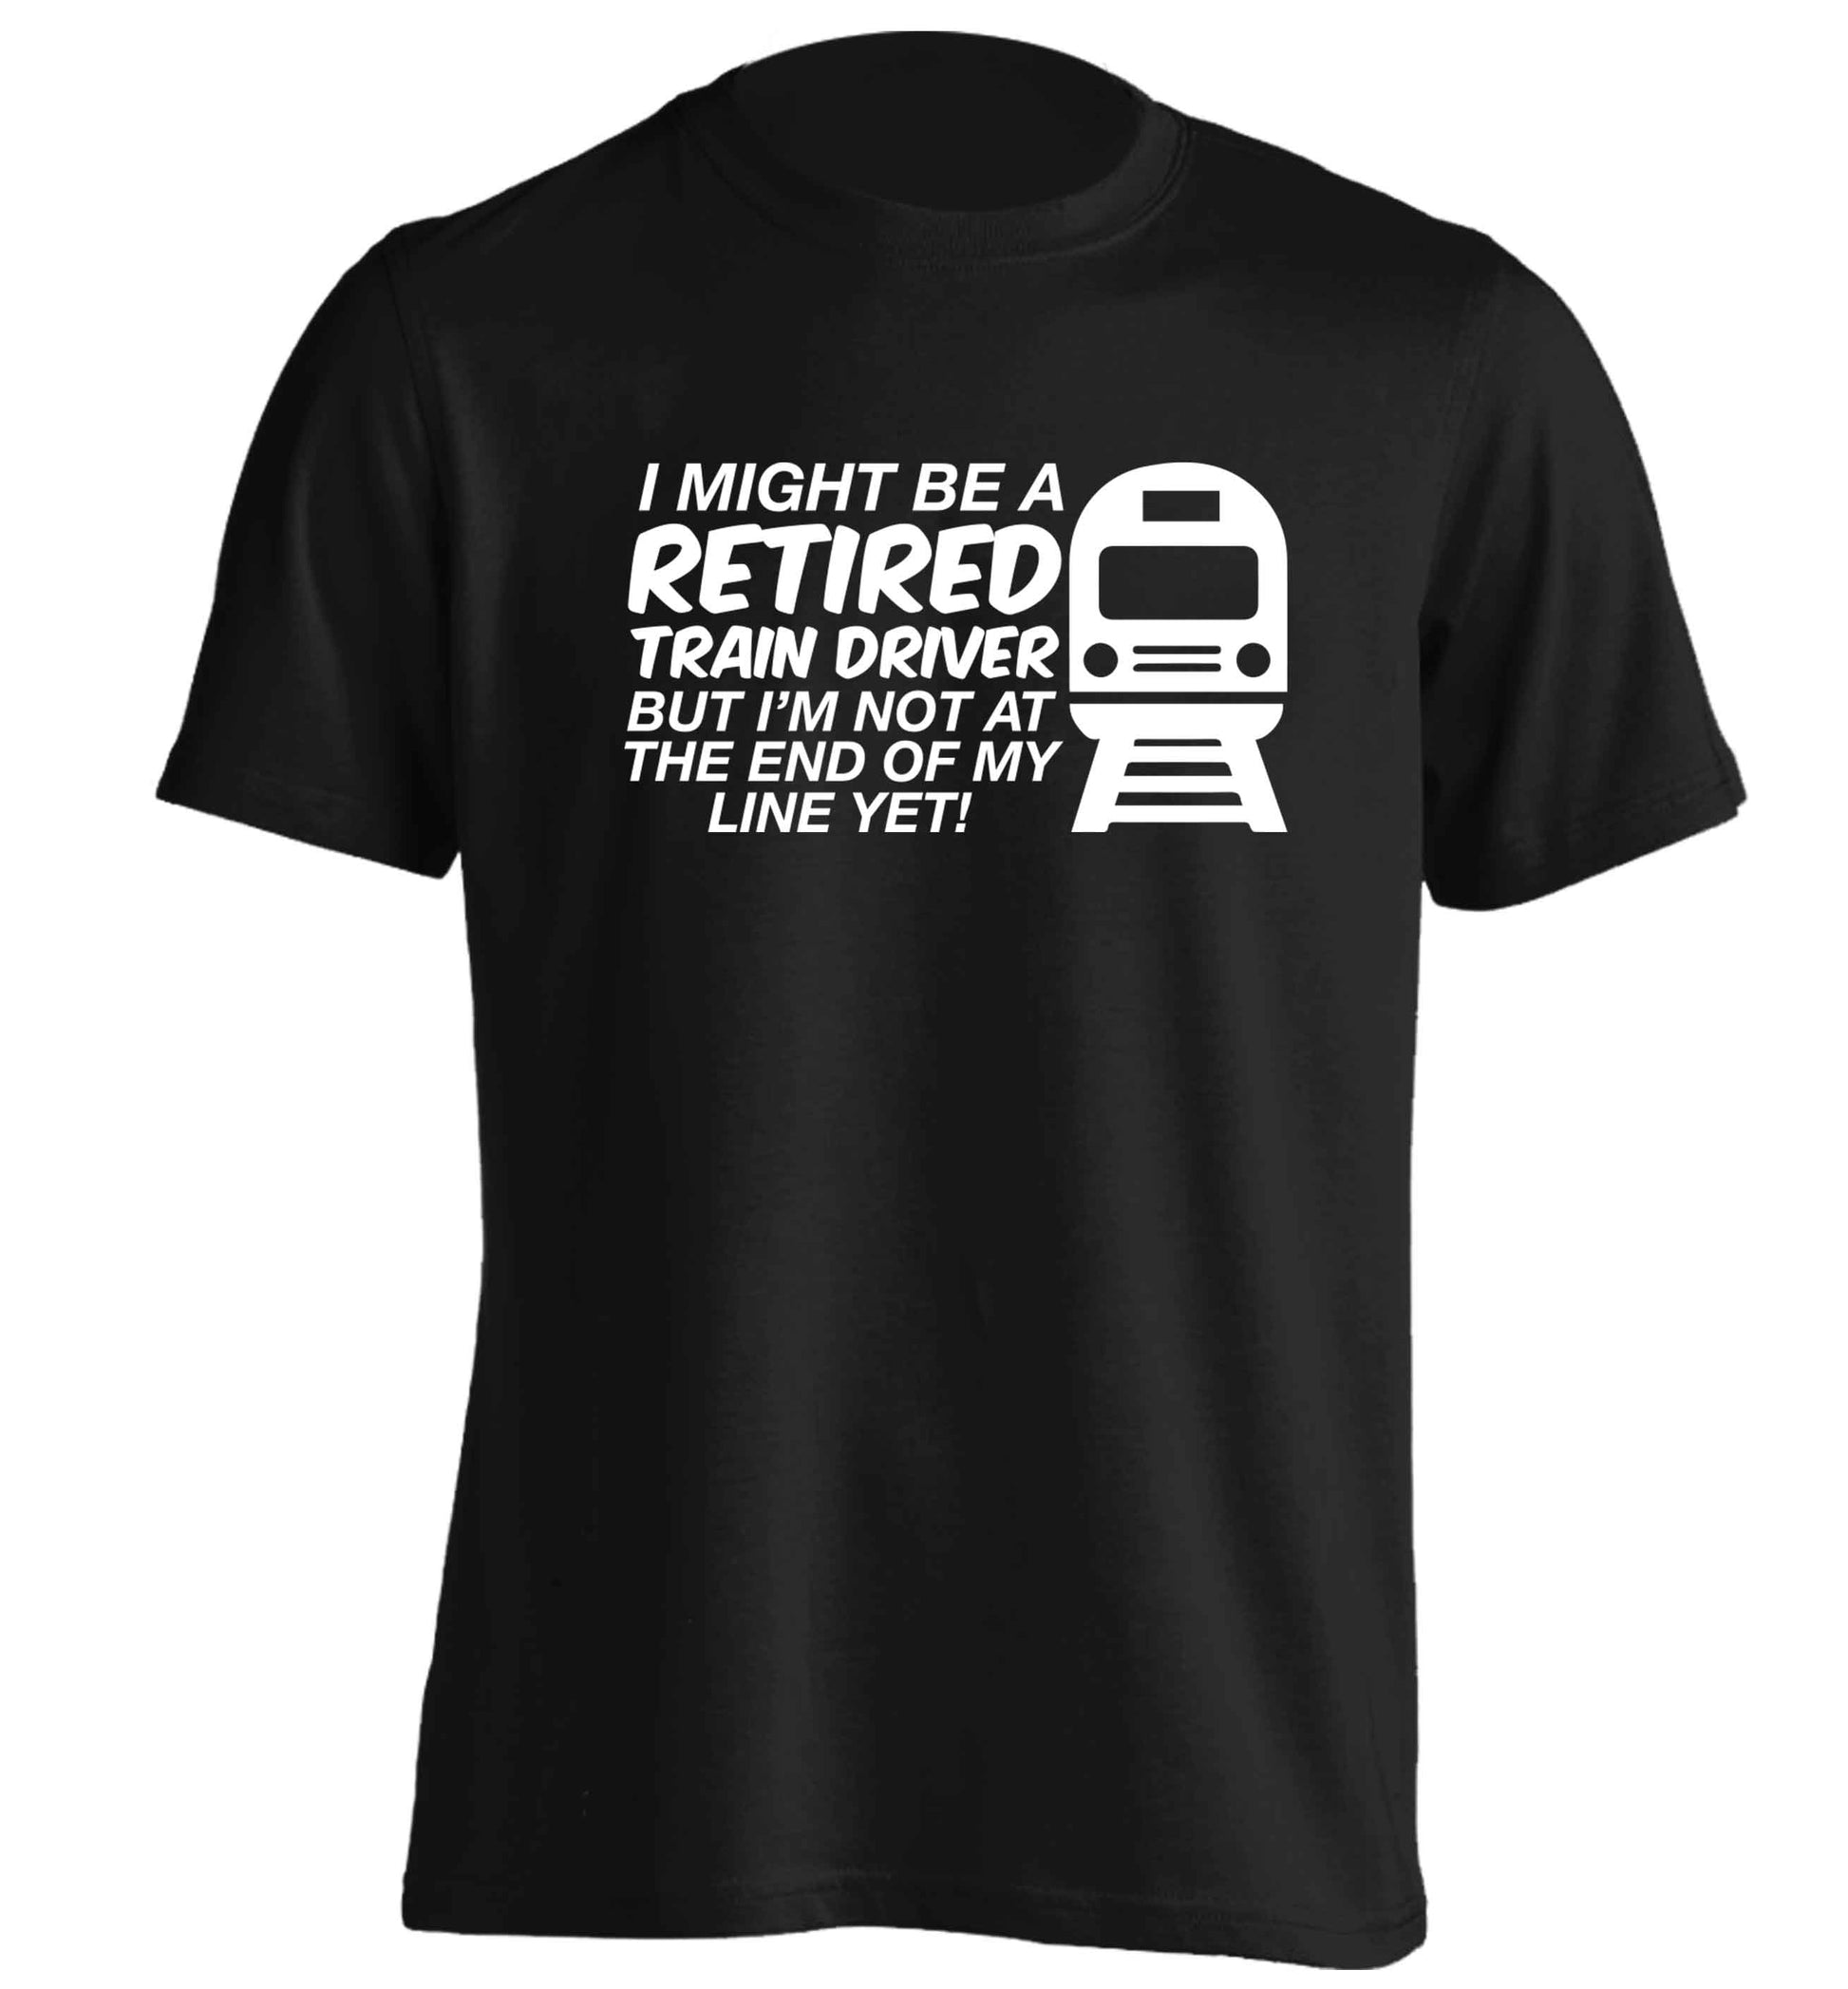 Retired train driver but I'm not at the end of my line yet adults unisex black Tshirt 2XL